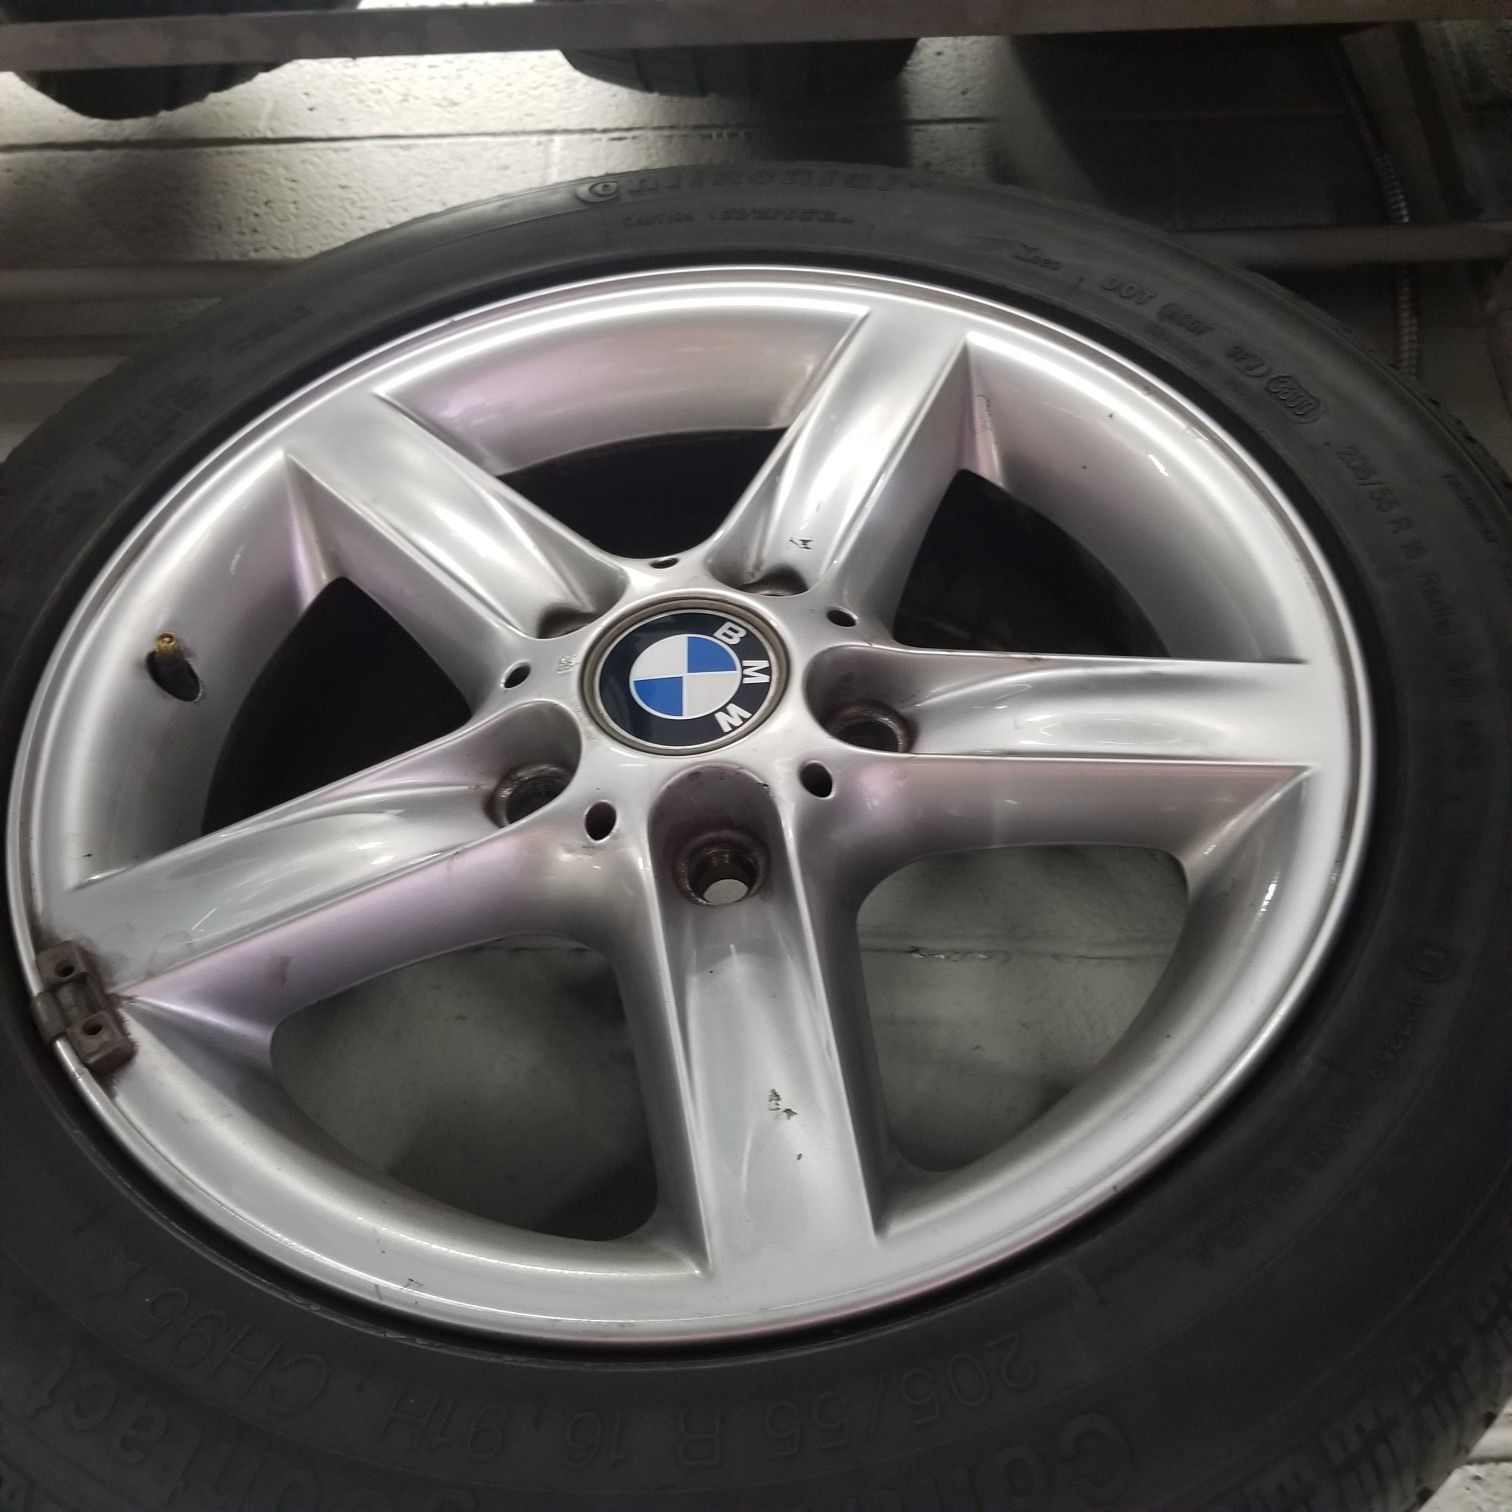 BMW rims and tire